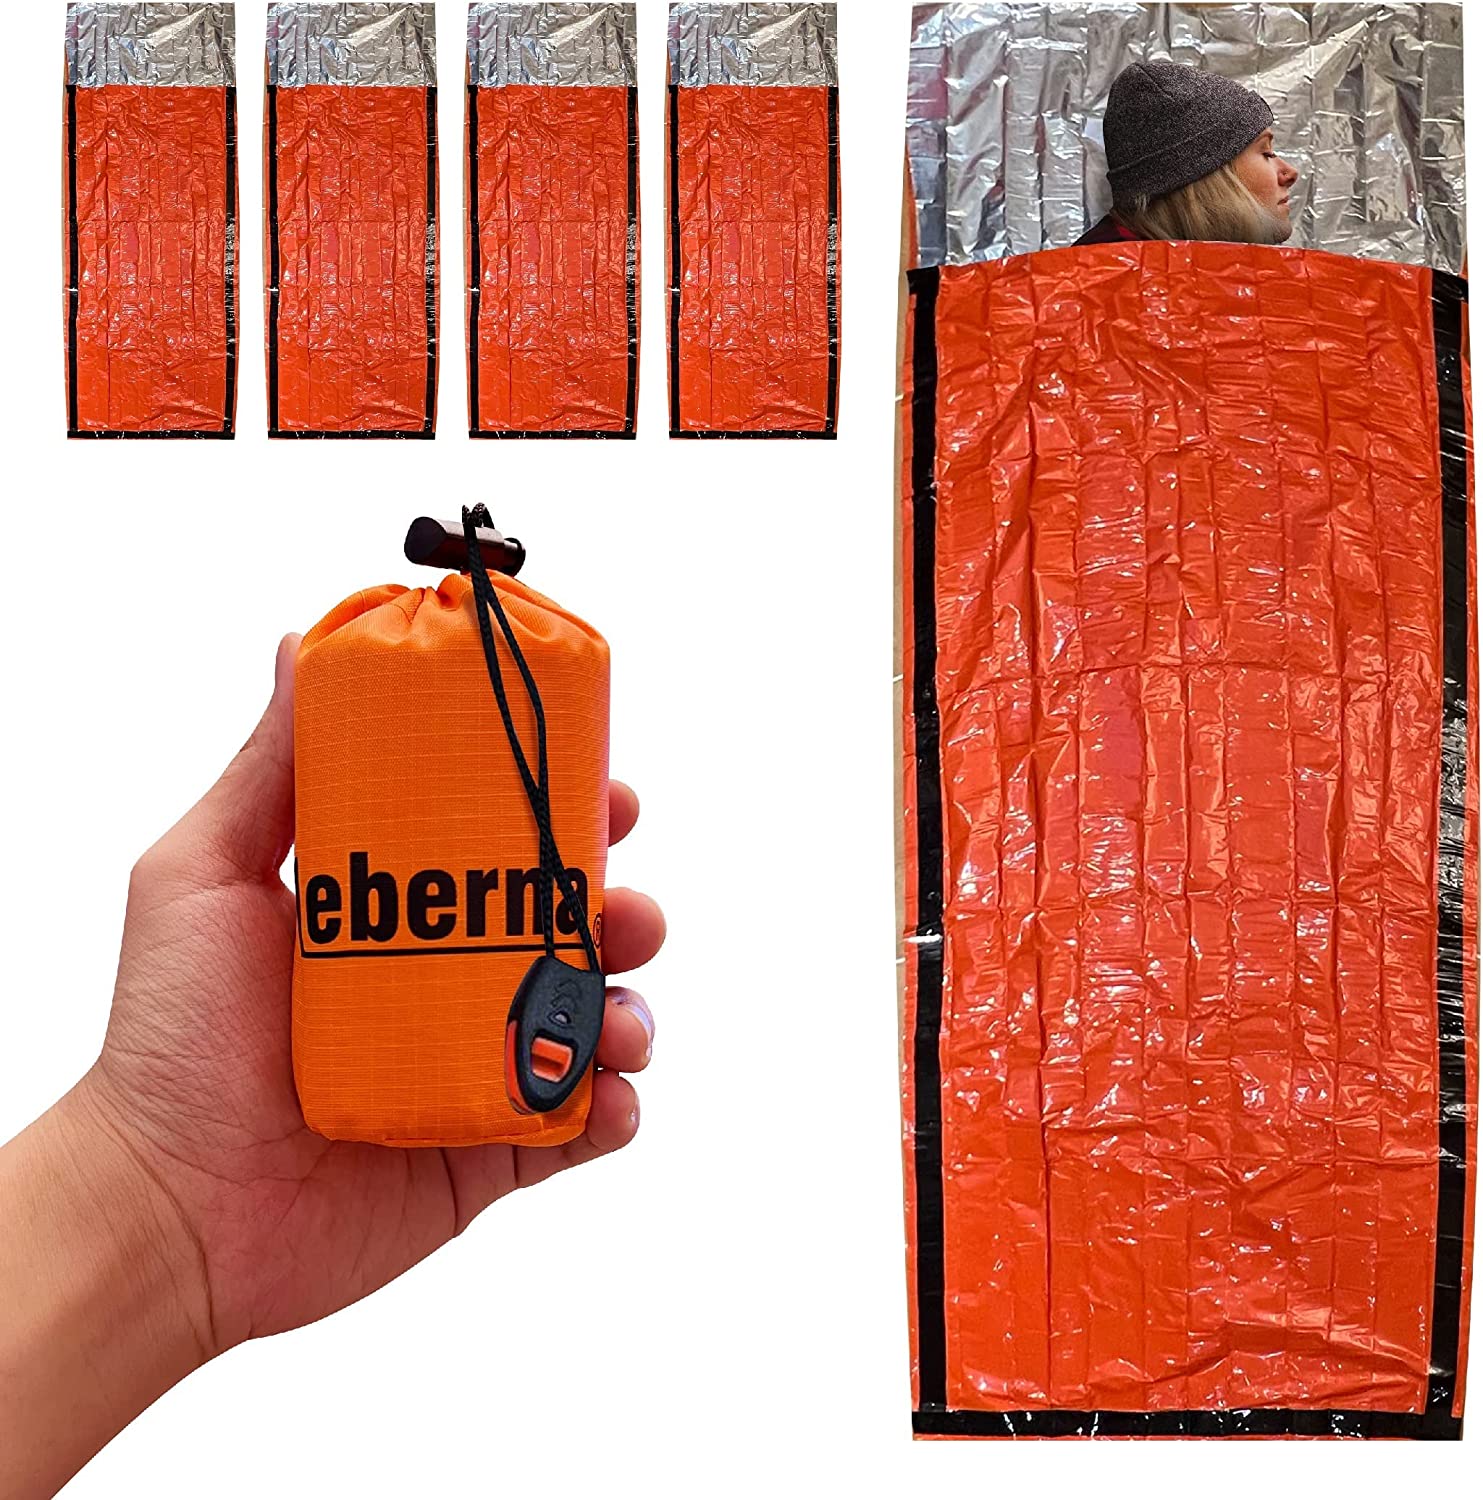 Emergency Bivy Sack Bivy Bag – Emergency Sleeping Bags 4 Pack Mylar Survival Sleeping Bag Emergency Bivvy Sack Waterproof Lightweight Foil Military Patriot Compact Gear Blanket Thermal Escape Camping